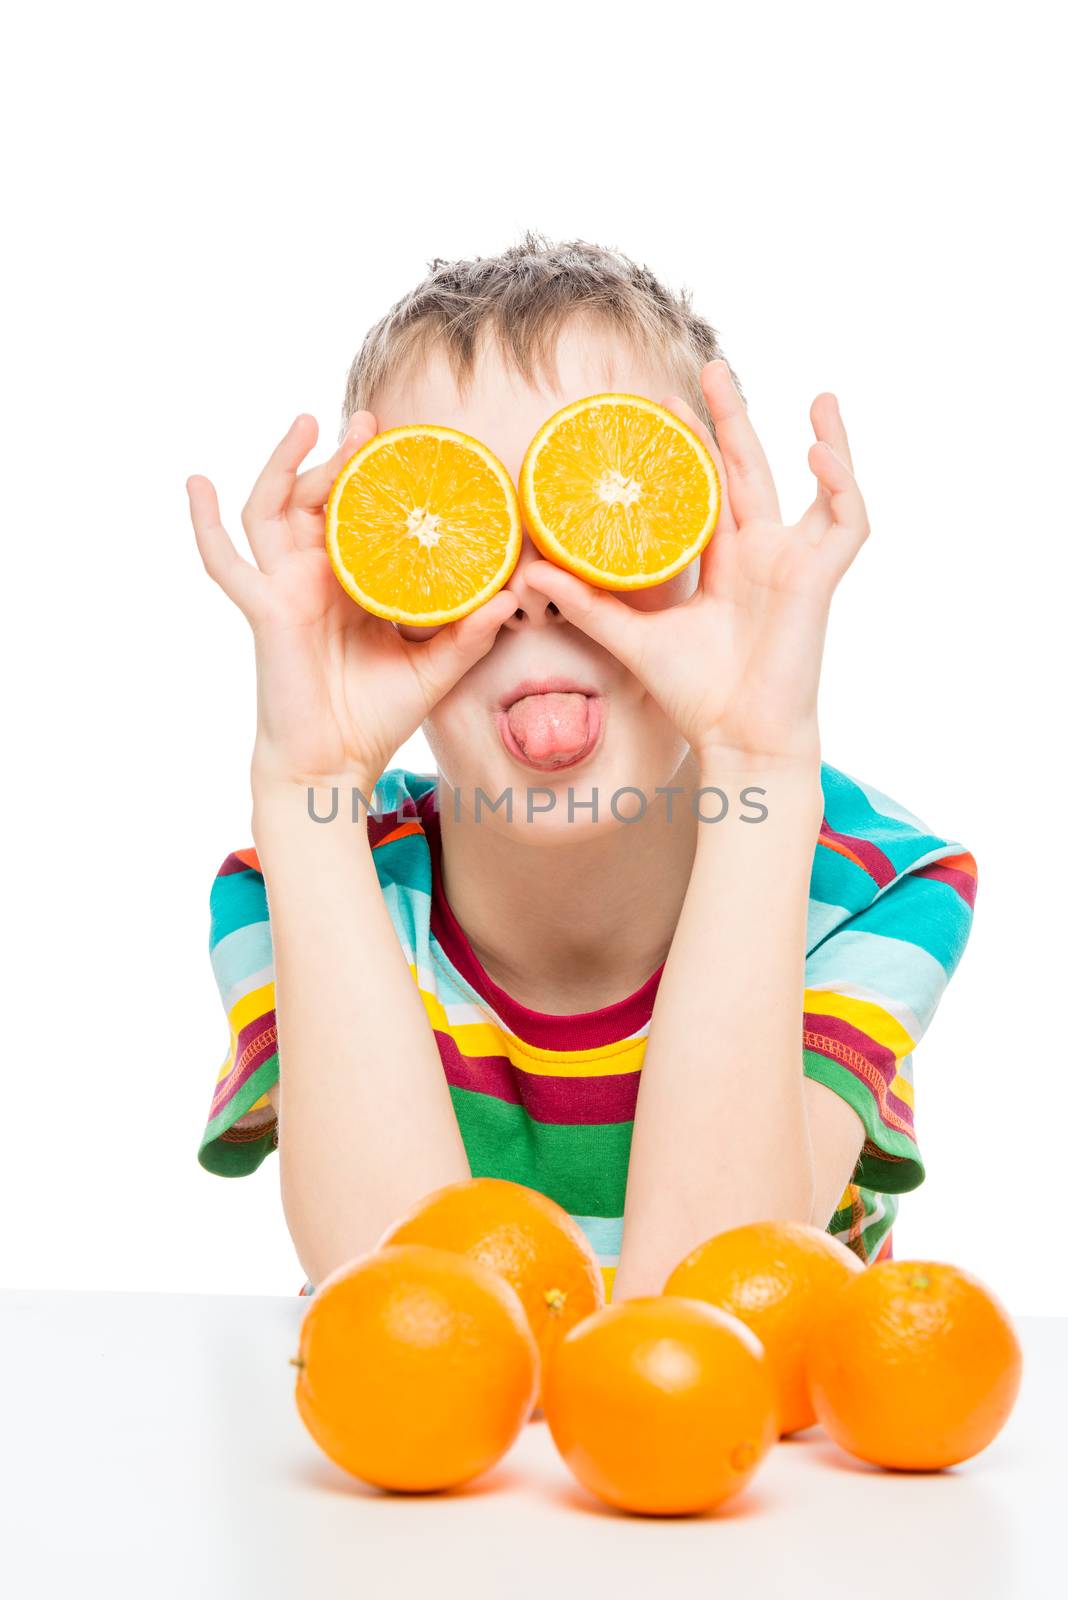 humorous photo of a boy with oranges halves on a white background in the studio